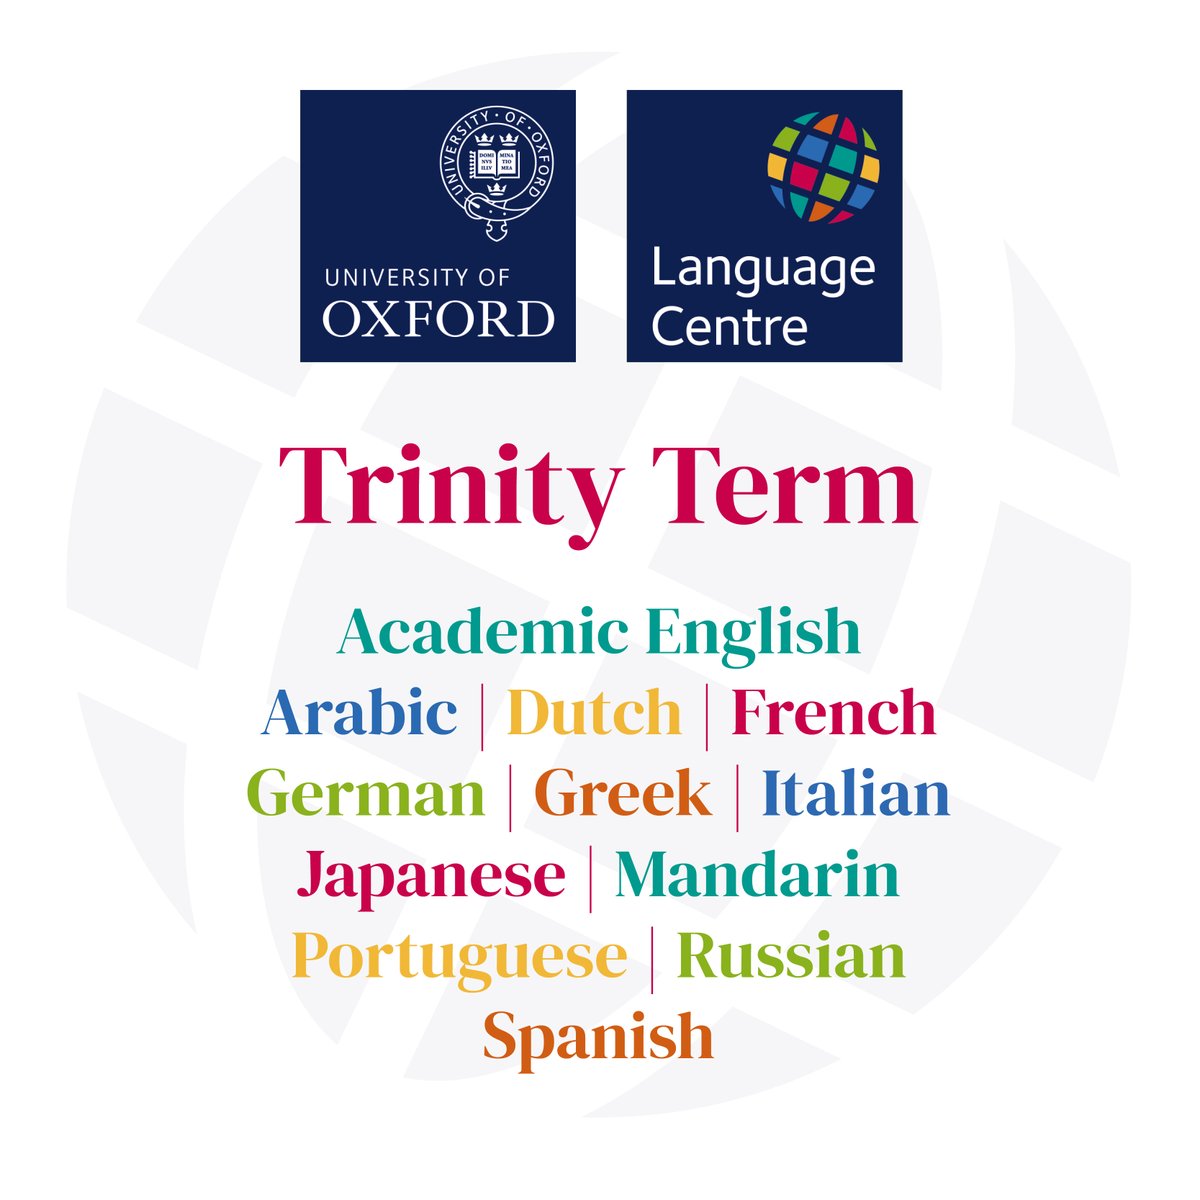 Enrol now for Trinity term Modern Languages courses @OxUniLangCentre! Courses are open to all and will be delivered both online and in person, with several evening classes on offer. Full funding for Oxford students is available. Enrol by noon on 26 April. lang.ox.ac.uk/language-cours…